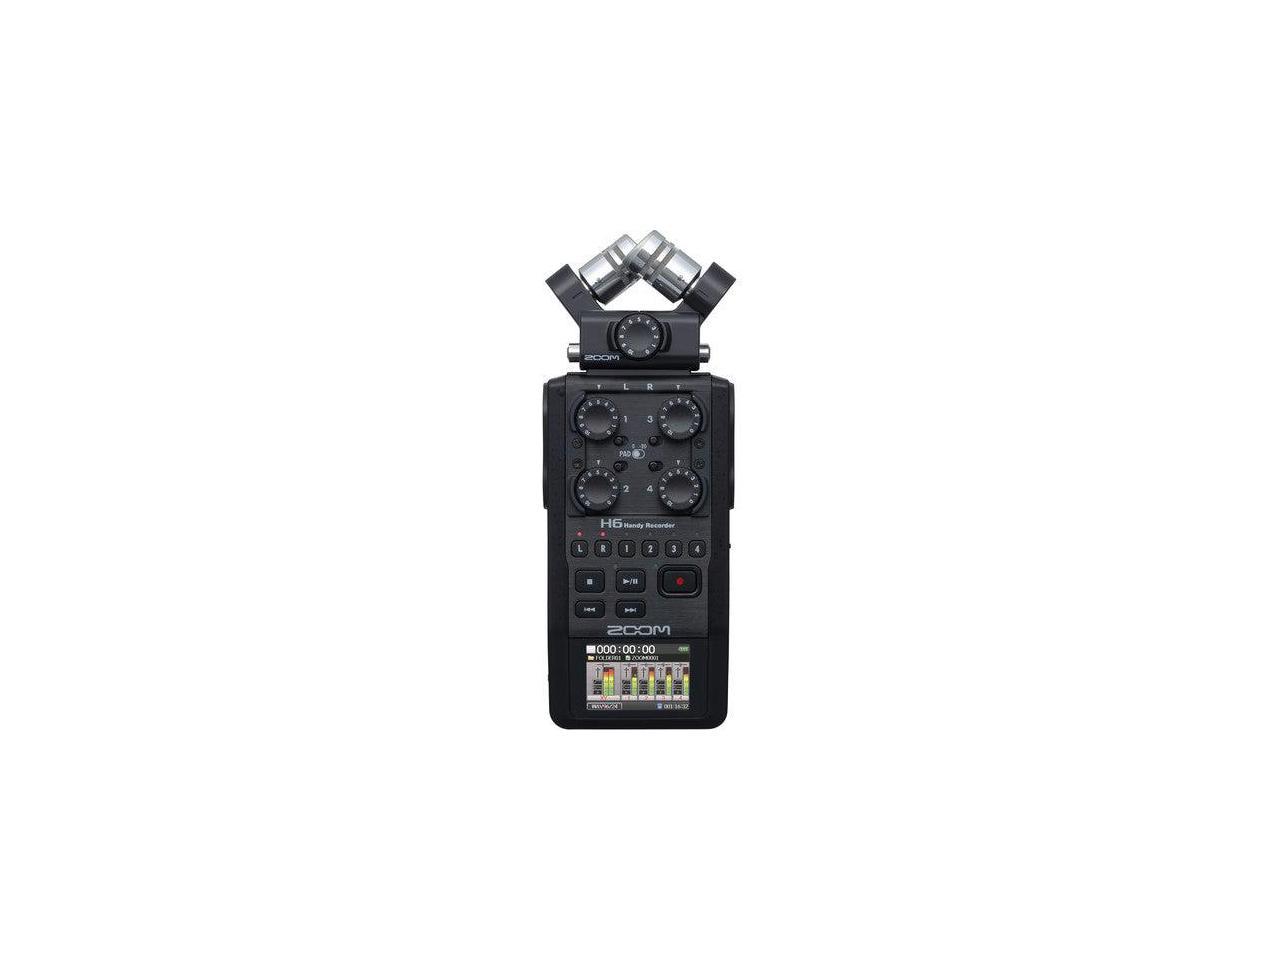 USB Audio Interface 6-Track Portable Recorder Stereo Microphones Battery Powered bundled with Zoom APH-6 Accessory Package 2020 Version Zoom H6 All Black 4 XLR/TRS Inputs SD Card 